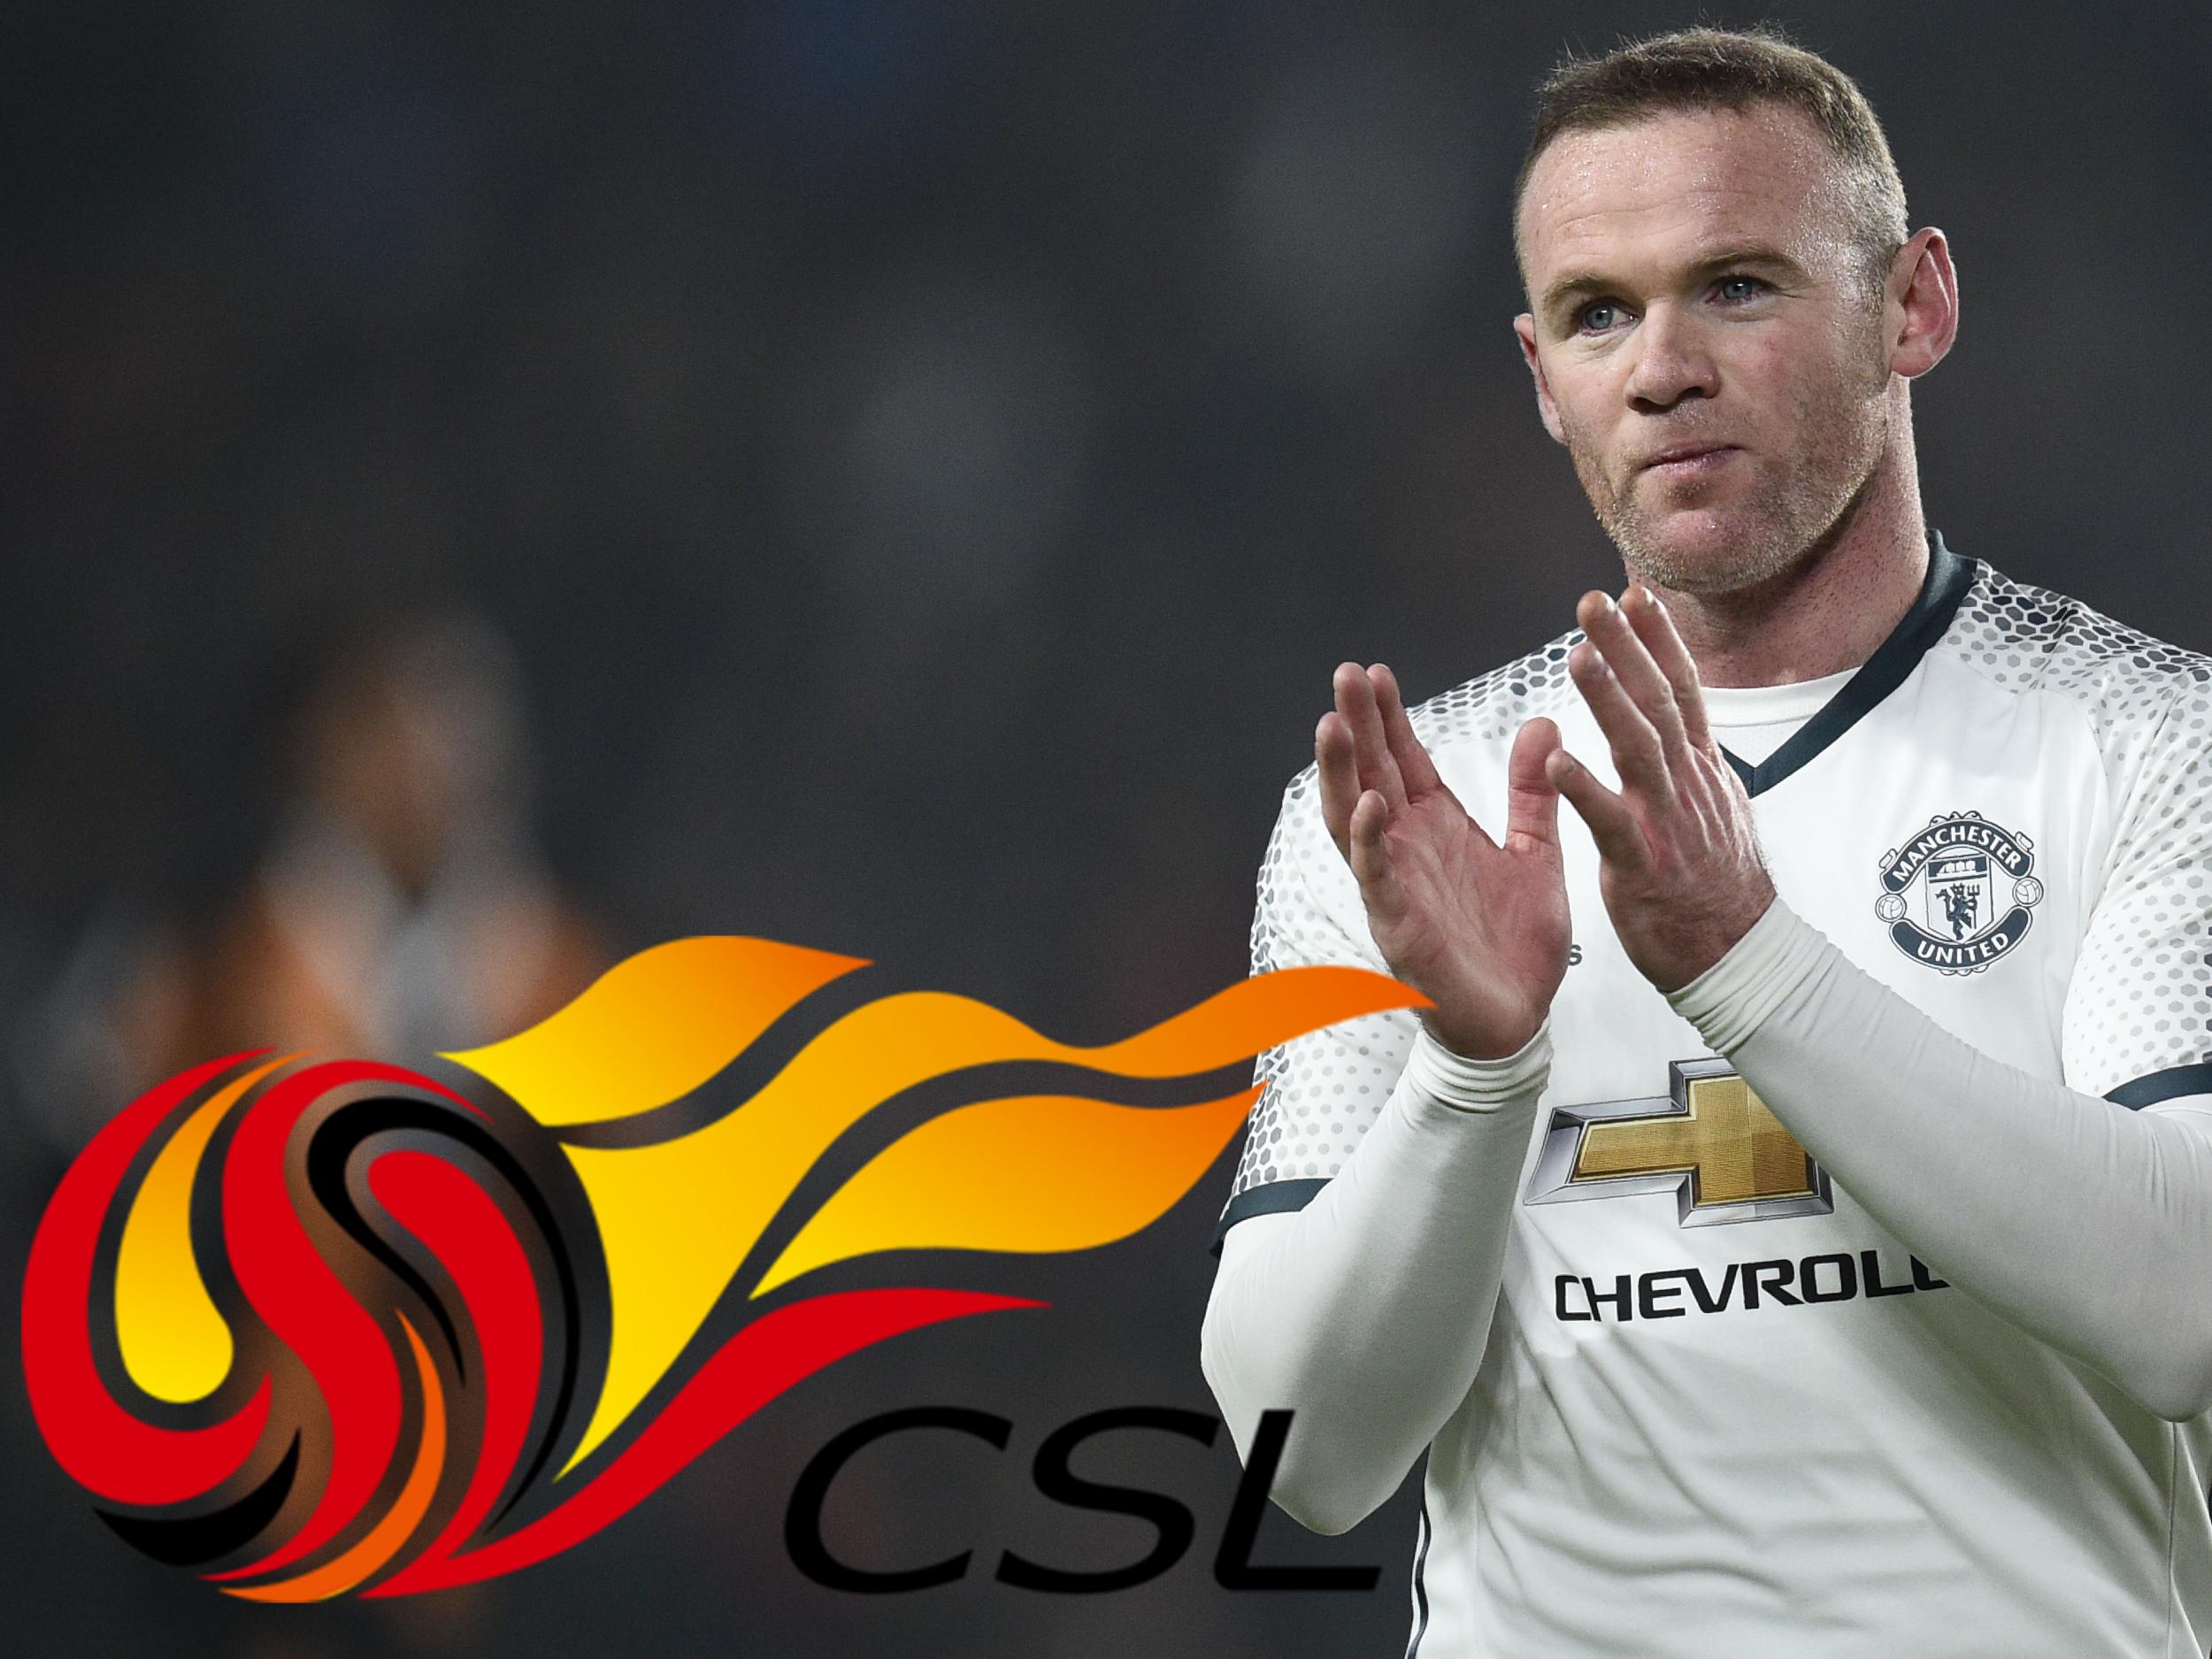 Rooney may be tempted into a move to the Chinese Super League